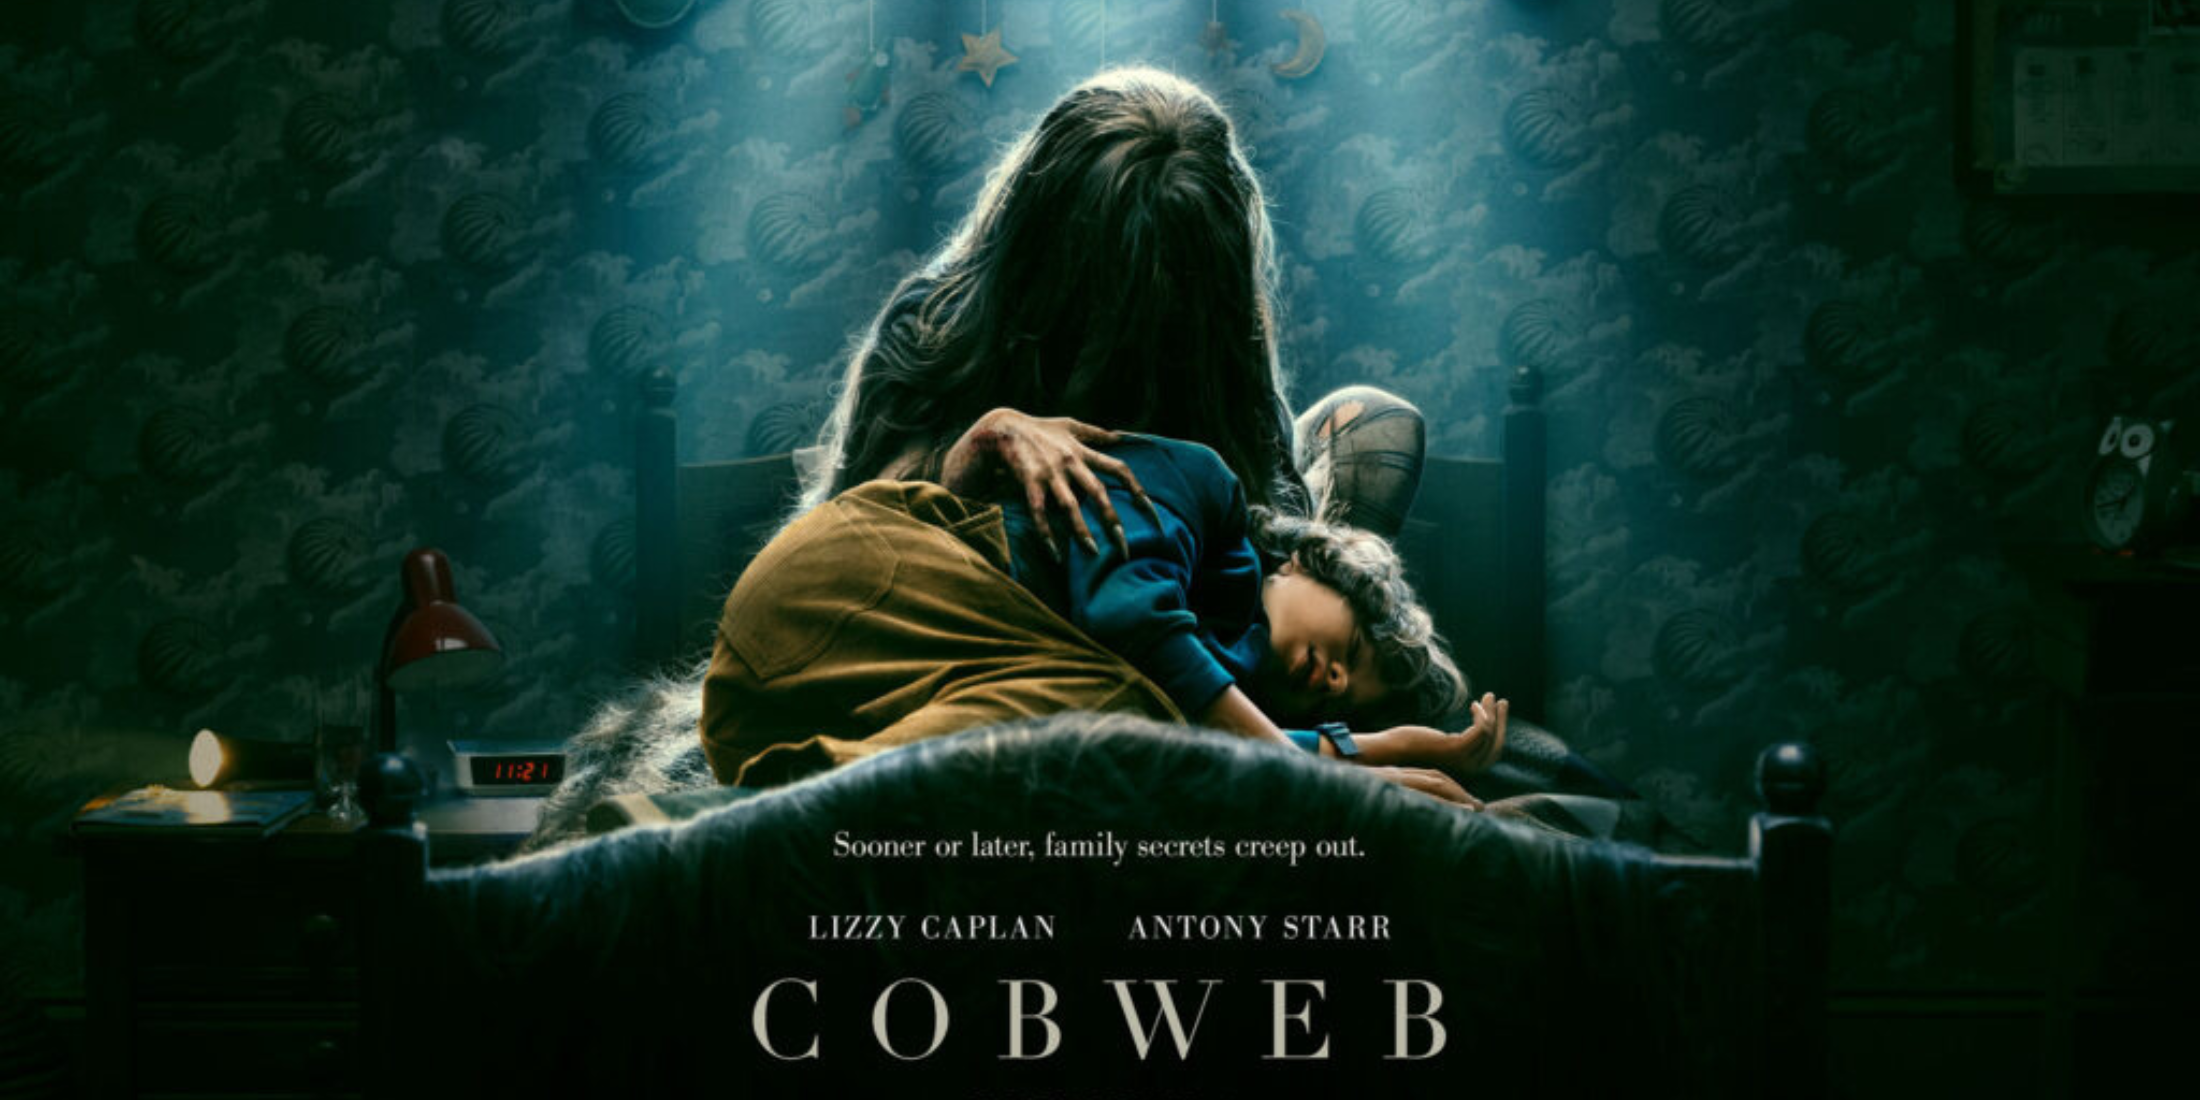 Cobweb Trailer Spins A Sinister Family Secret into A Terrifying Tale